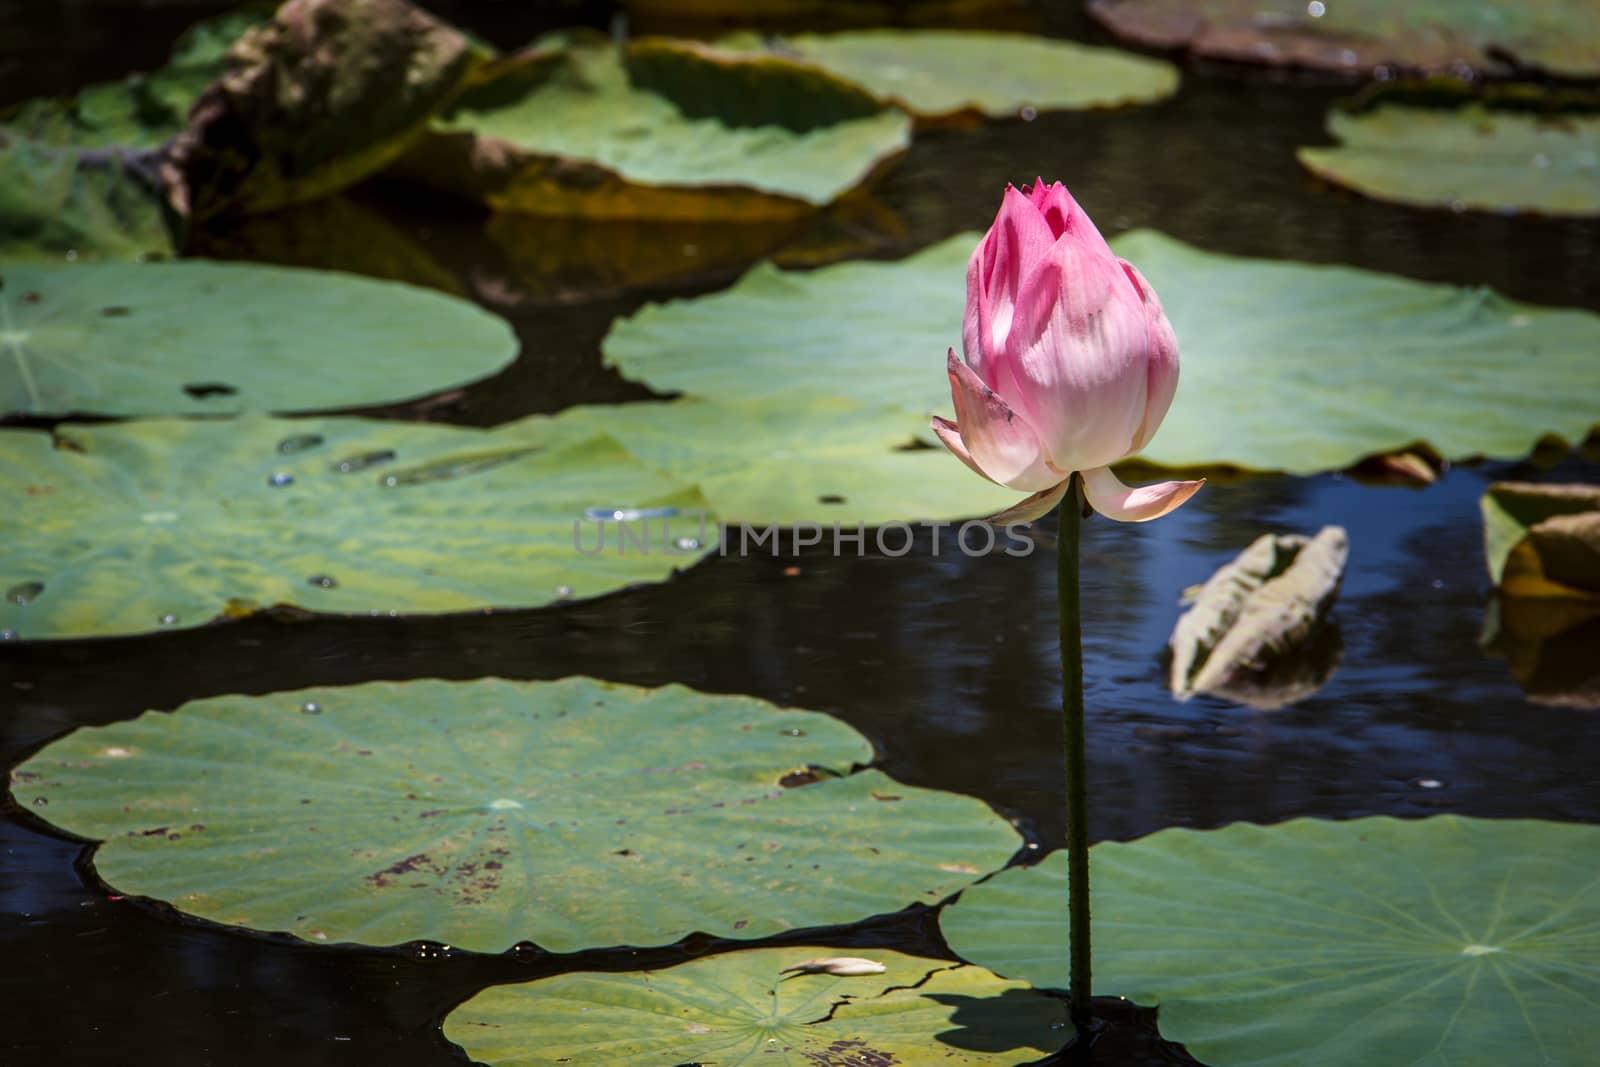 Lotus flower and Lotus flower plants  in the pond.